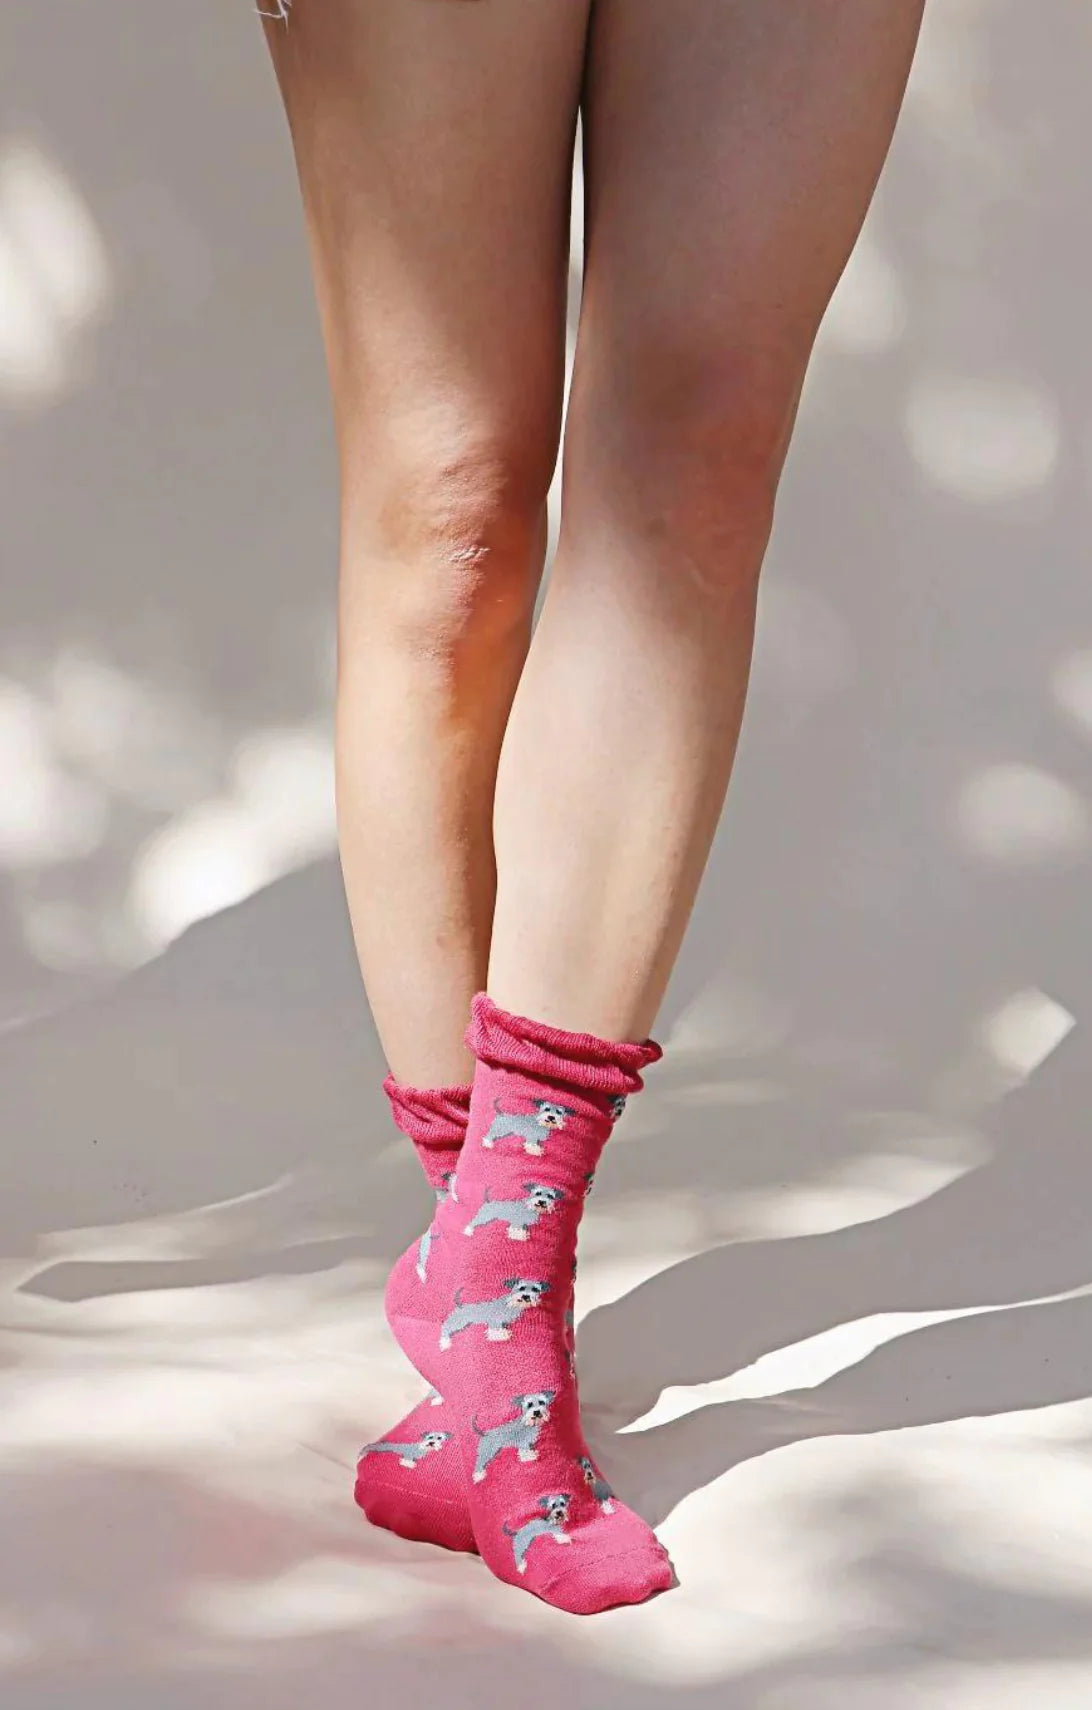 Front view of a woman's leg wearing socks with a pinkish fabric of a product called Animal Rescue Pairs SCHNAUZER Dog Socks of the Tabbisocks brand with an illustration of a miniature schnauzer throughout